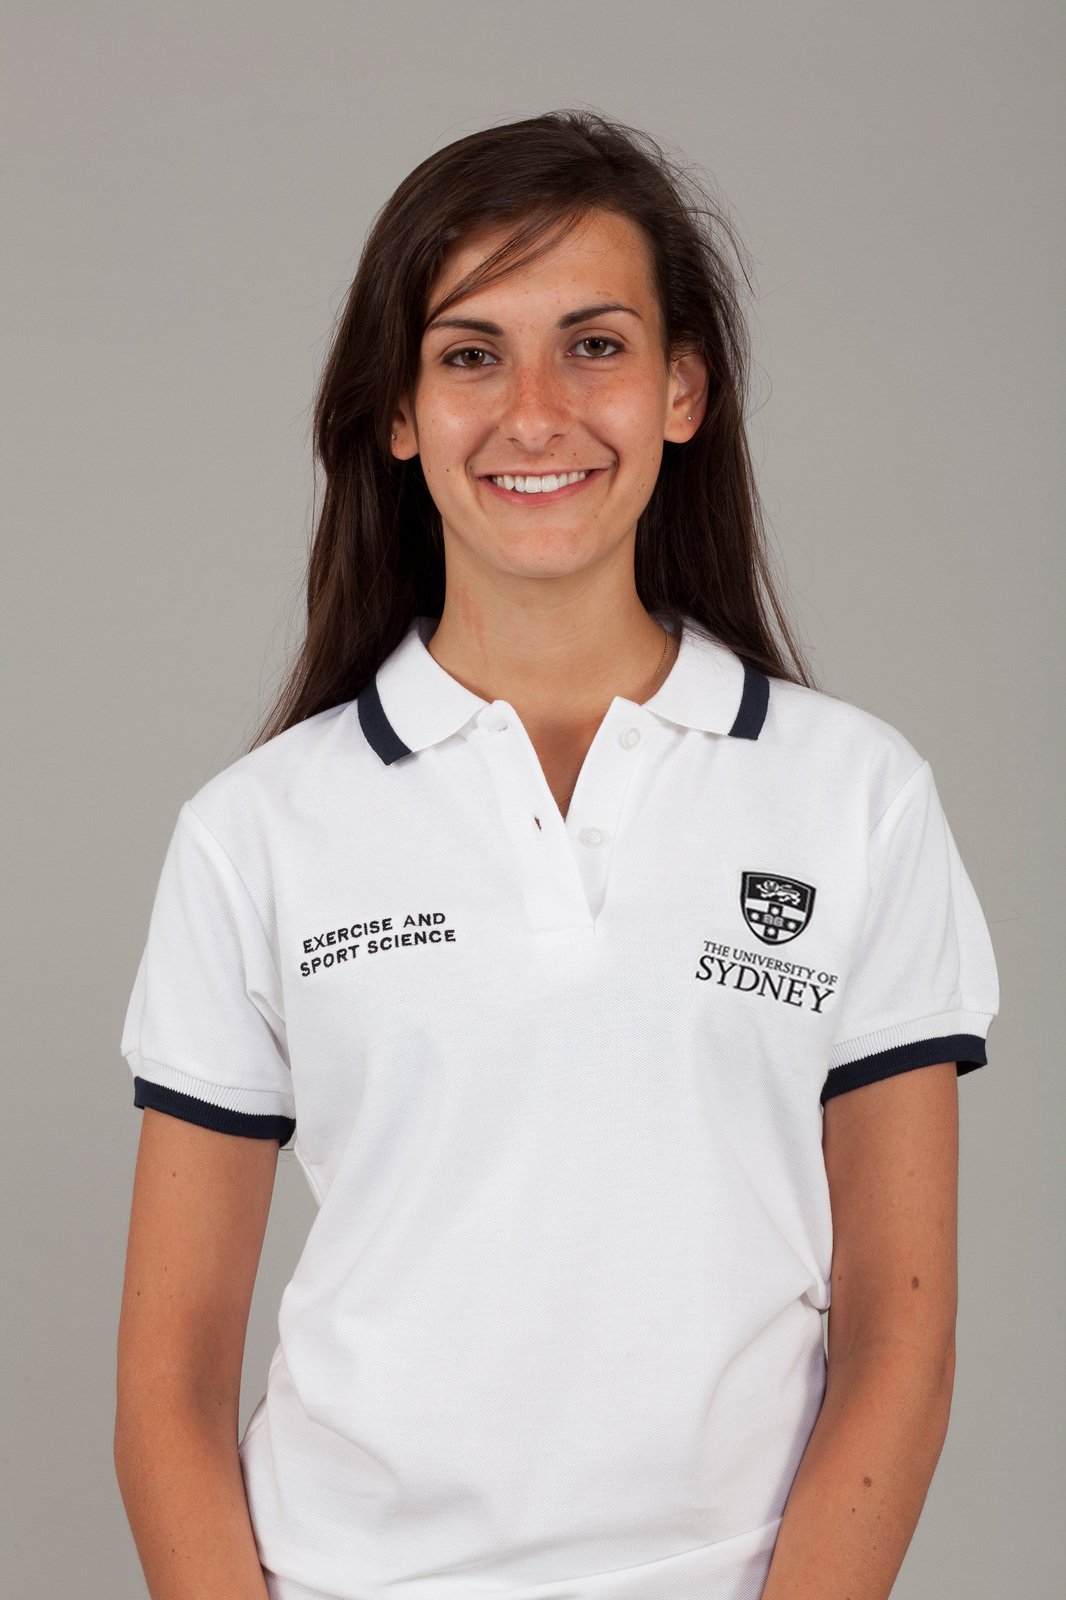 The University of Sydney eStore - Polo shirt - Women's Exercise and ...